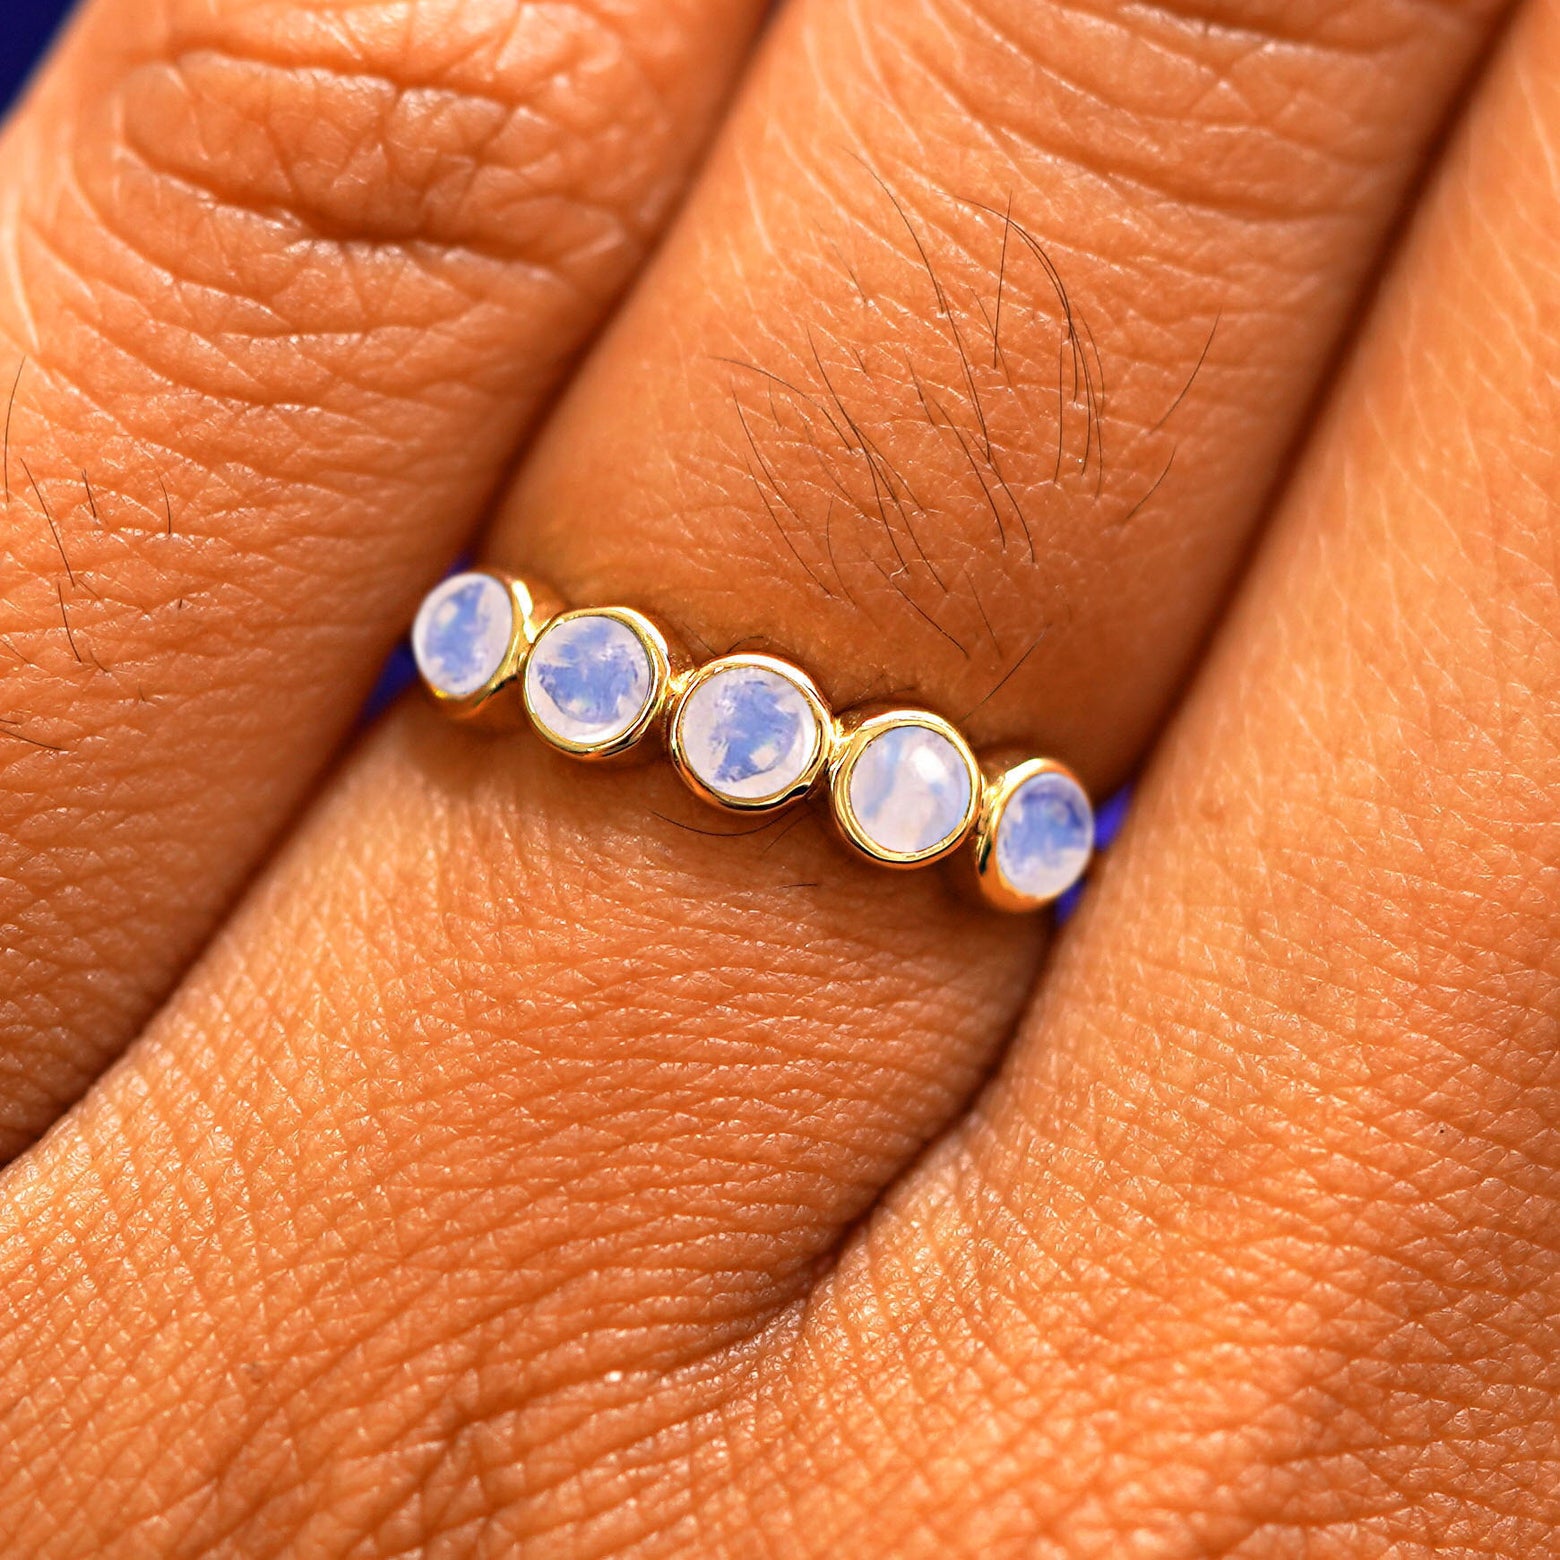 Close up view of a model's hand wearing a yellow gold 5 Gemstones Ring in moonstone